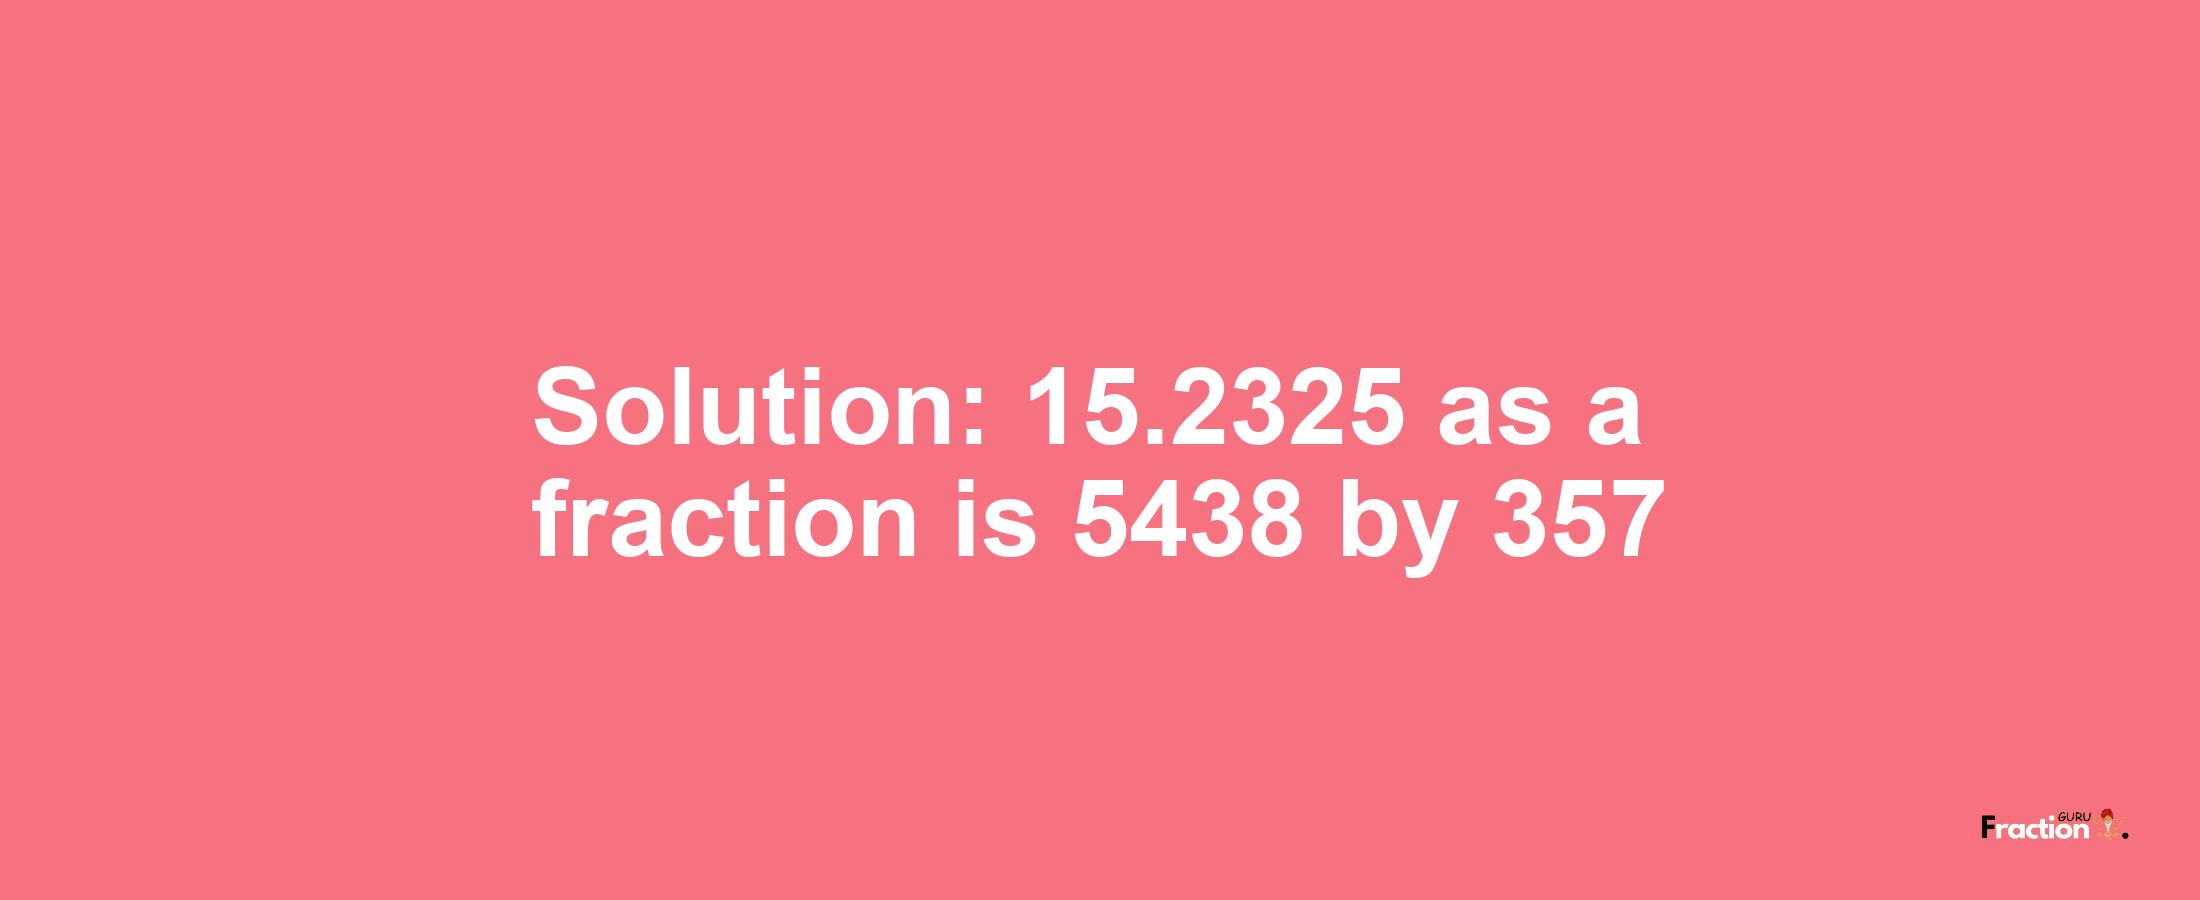 Solution:15.2325 as a fraction is 5438/357